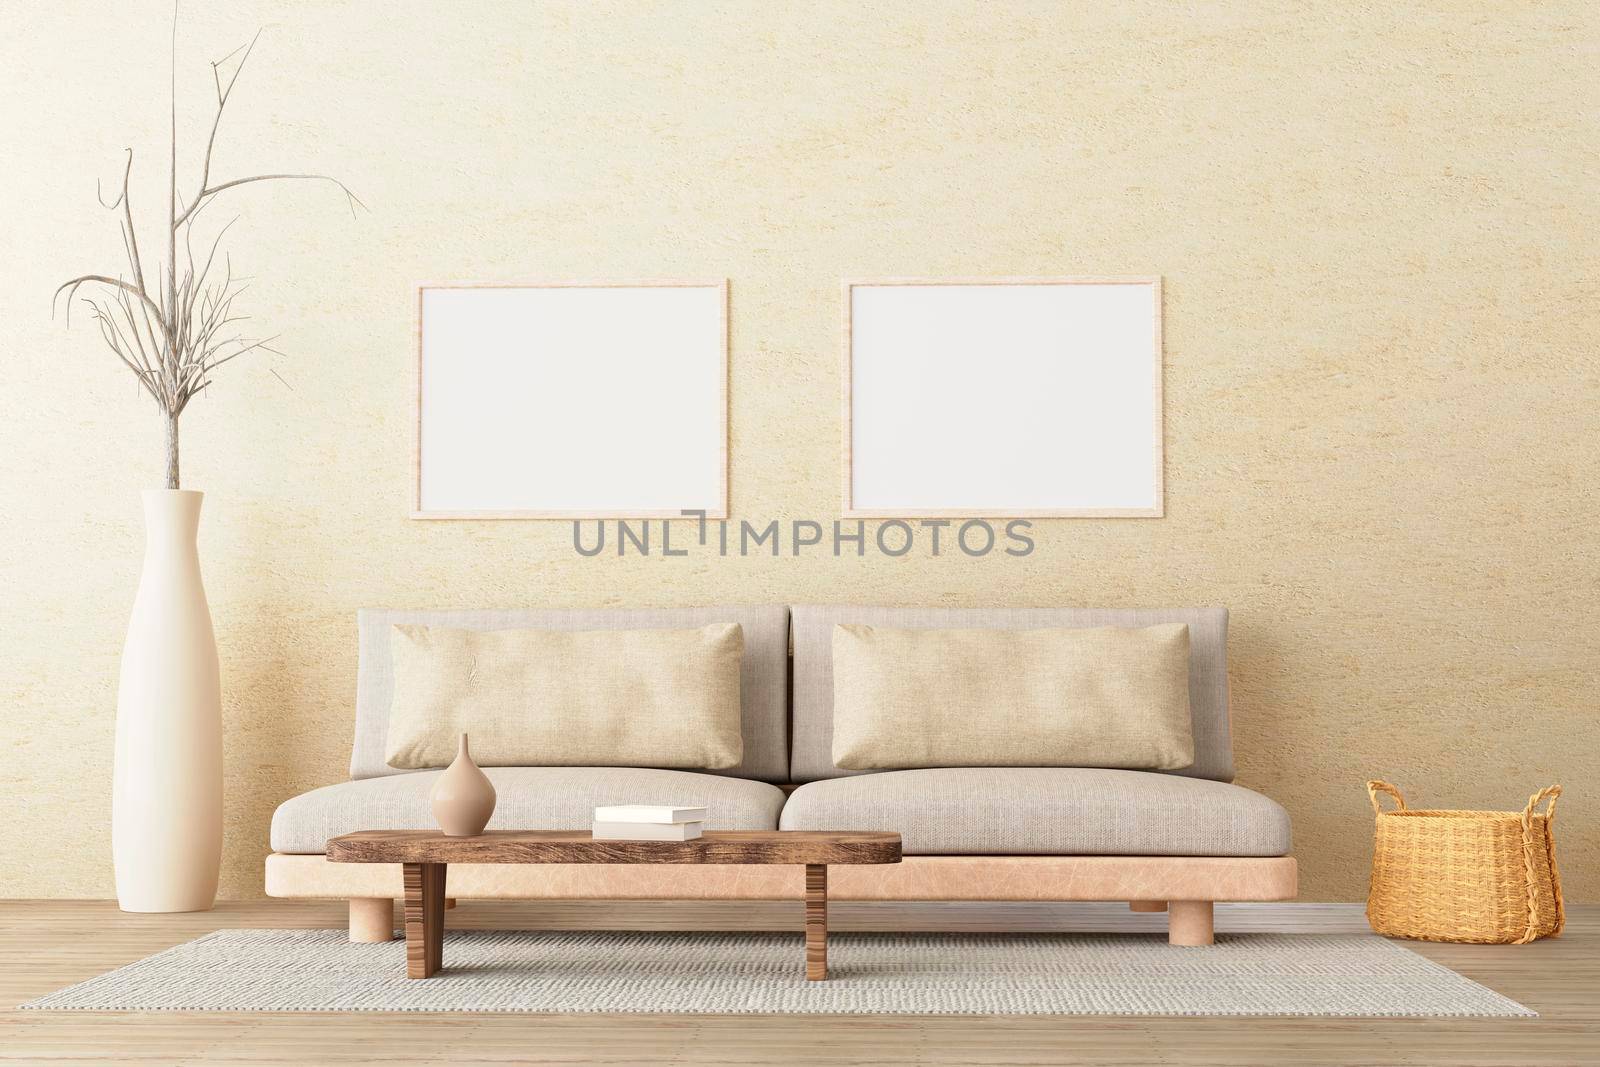 Two horizontal posters mockup in neutral style interior living room with low sofa, ceramic jug, side table, wicker basket and books on empty concrete wall background. 3d render.